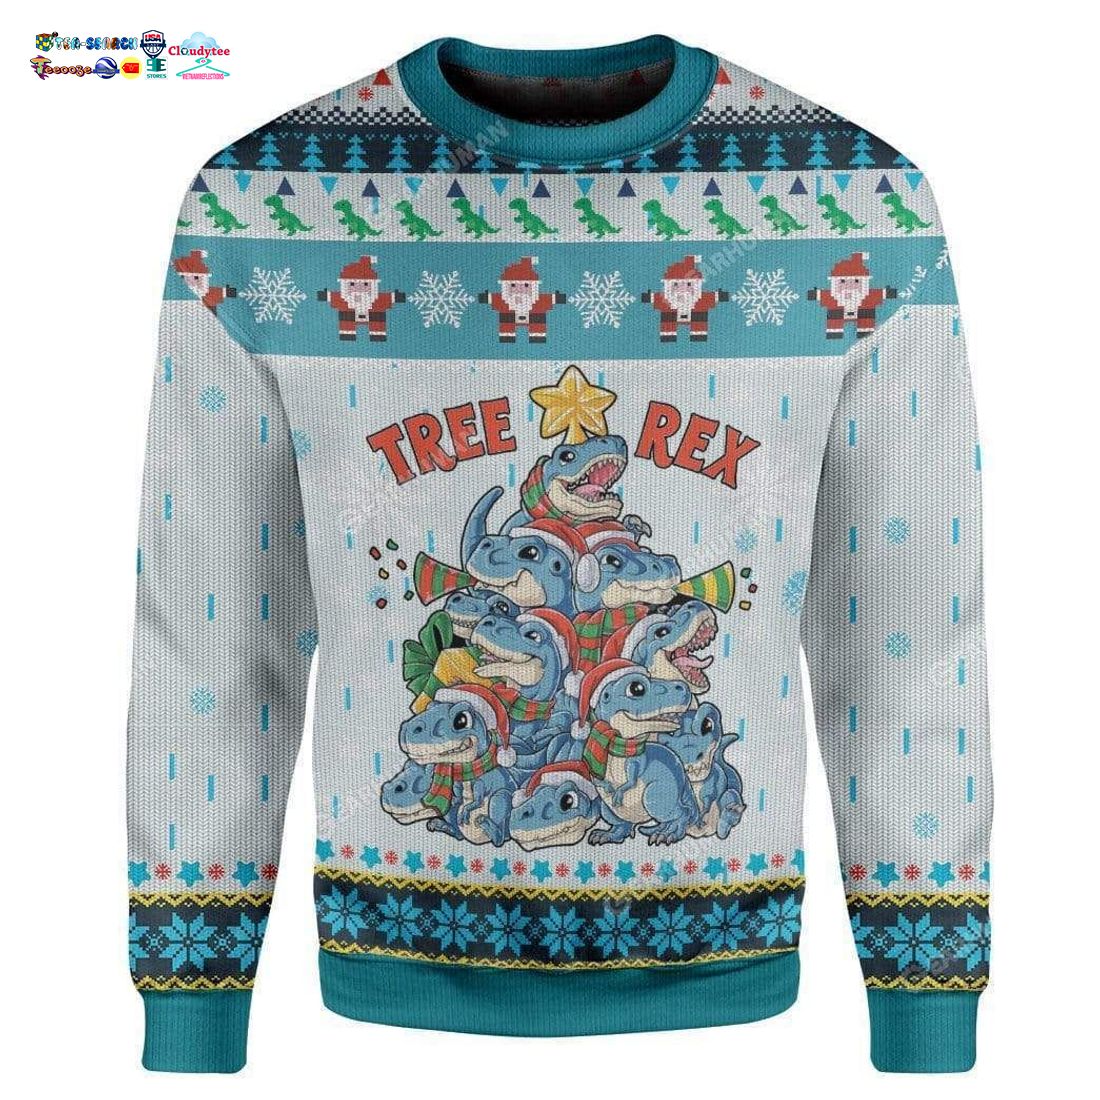 Tree Rex Ver 1 Ugly Christmas Sweater